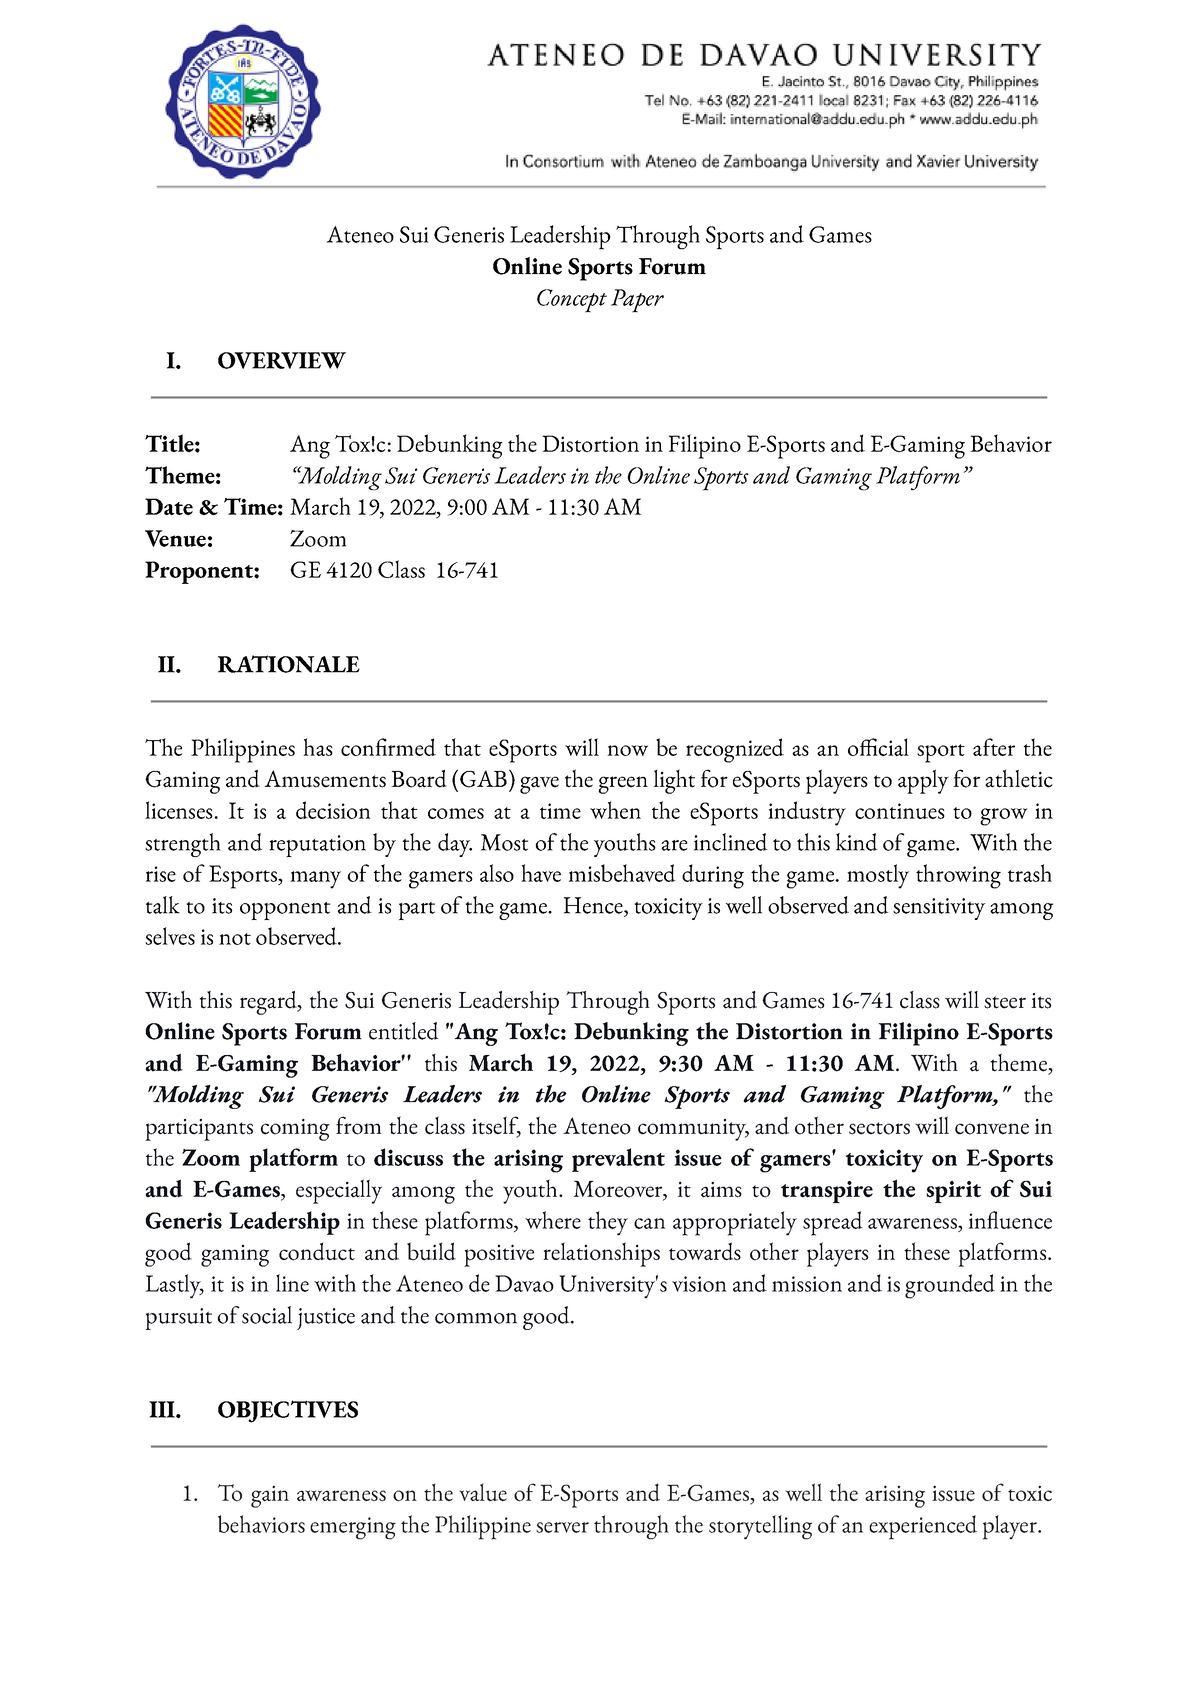 ASGL 16-741 - Ang Toxc Concept Paper - Ateneo Sui Generis Leadership ...